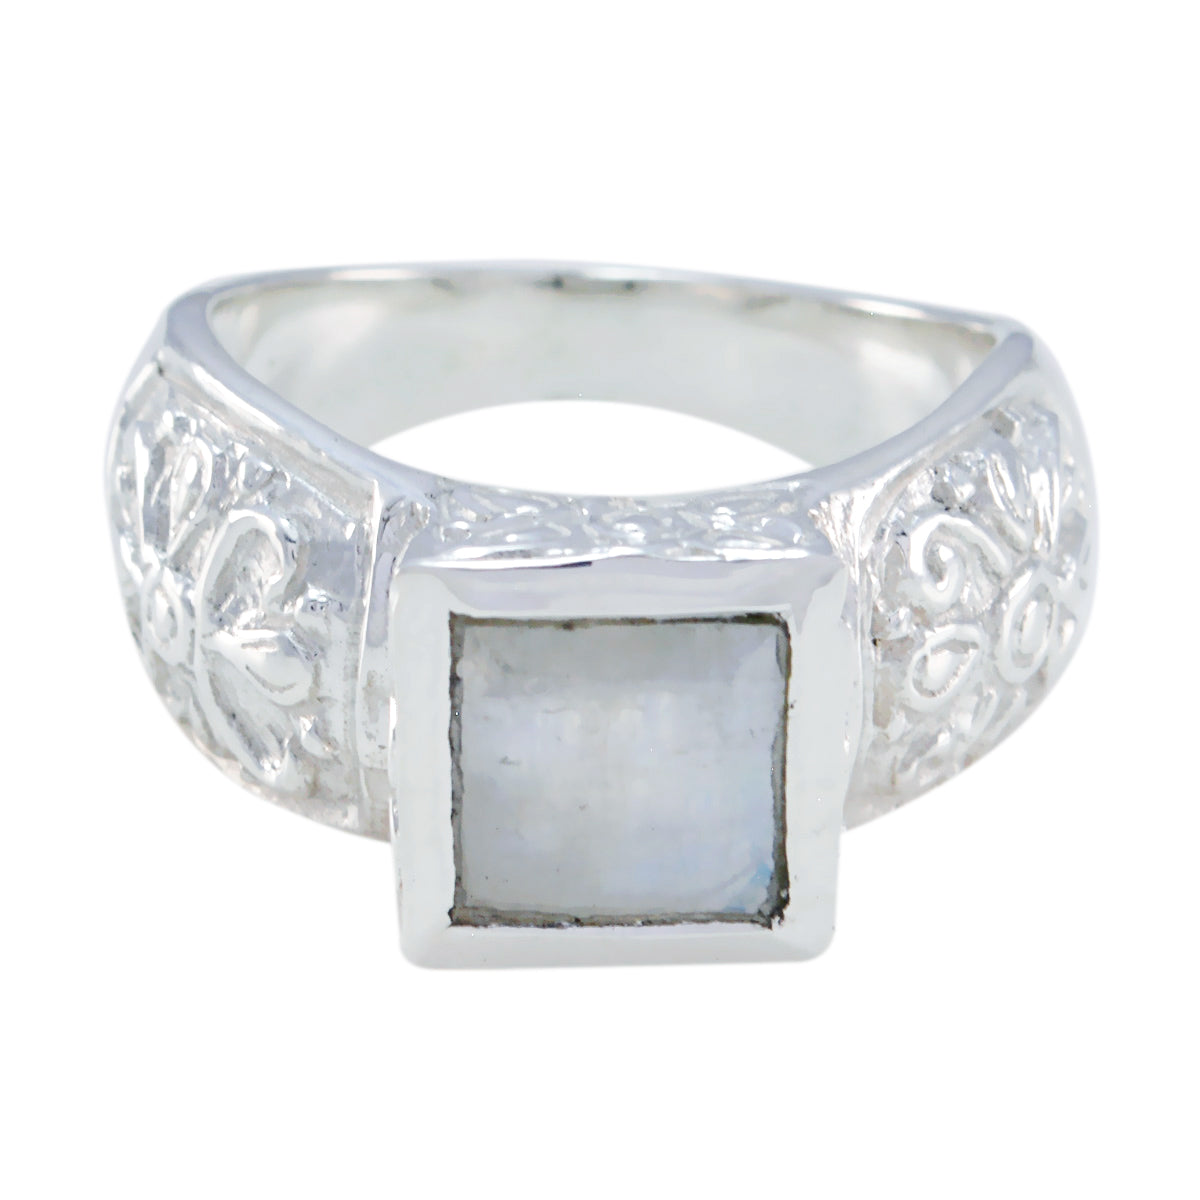 Appealing Stone Rainbow Moonstone Sterling Silver Rings Green Jewelry